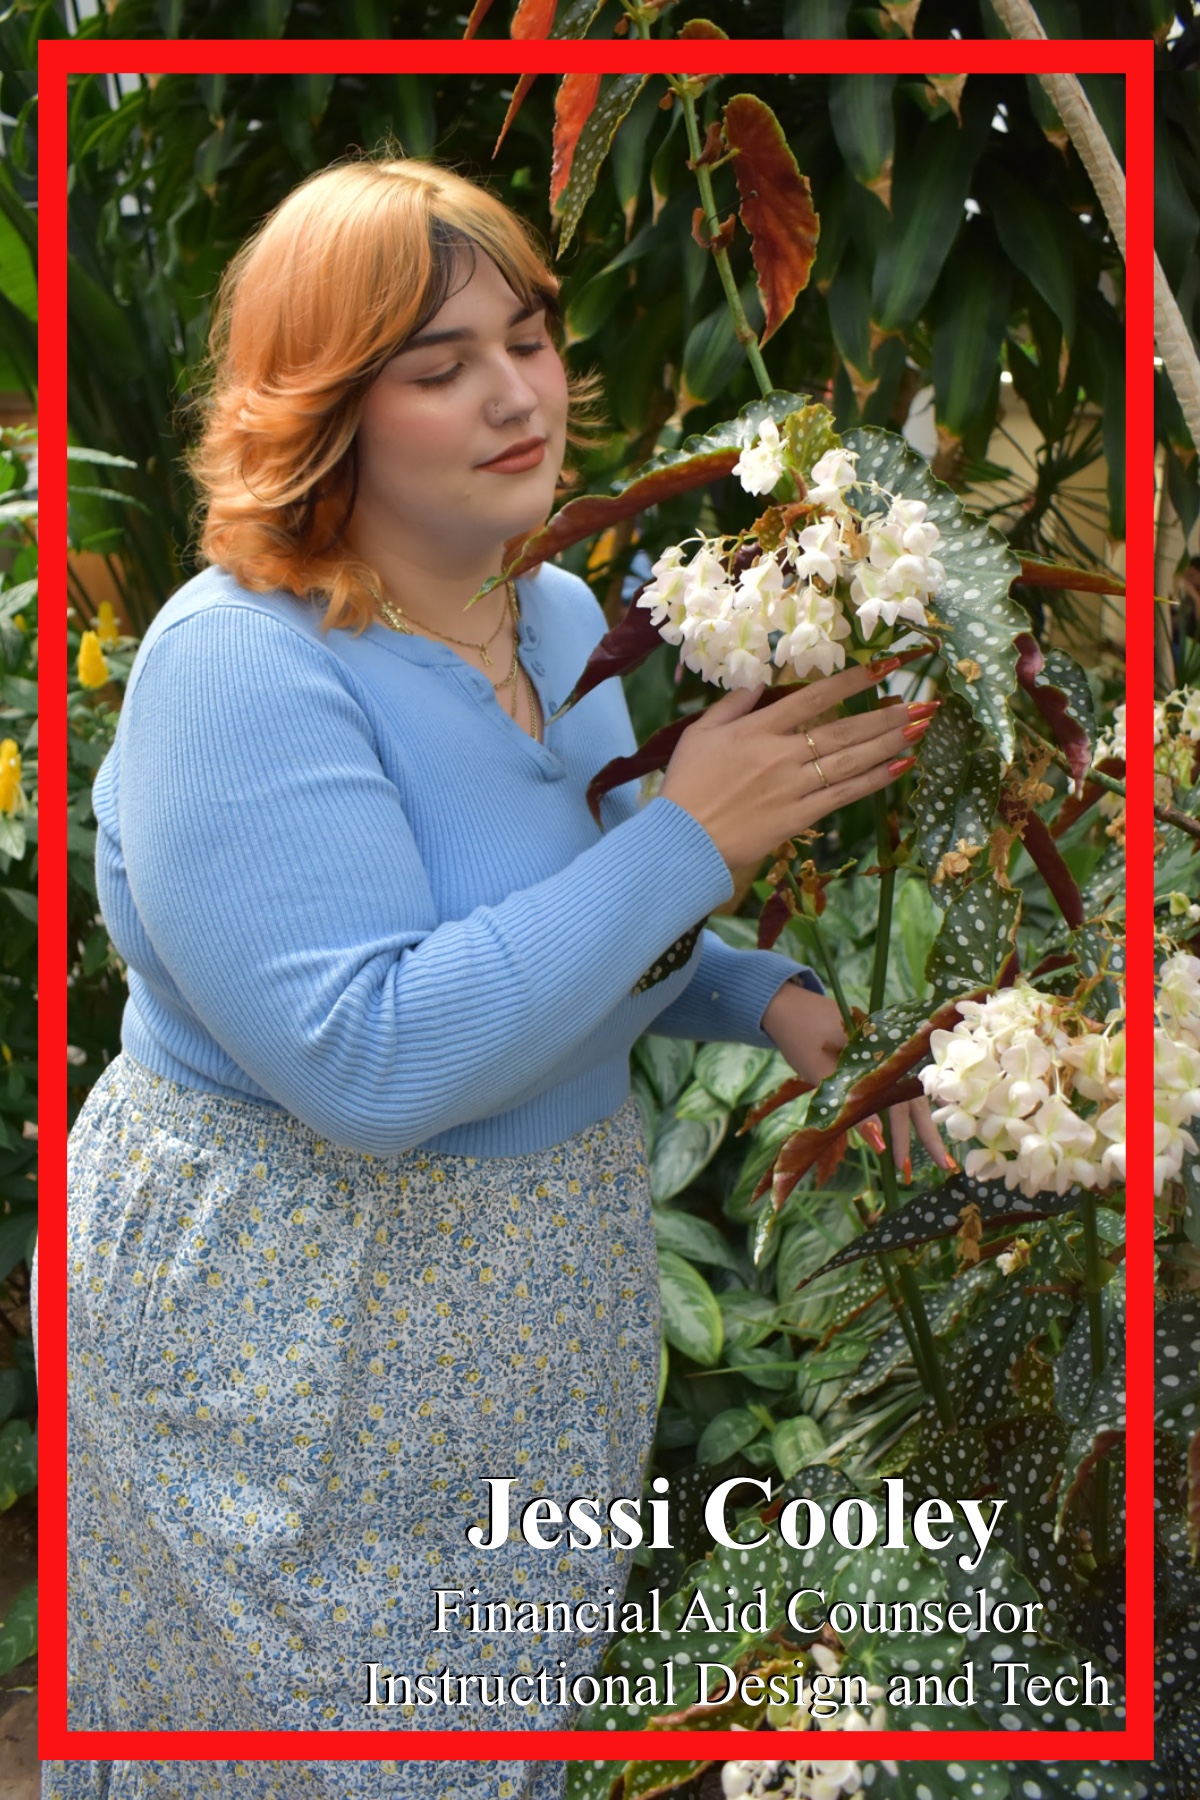 Jessi Cooley, Financial Aid Counselor and Instruction Design and Tech major, cupping white flowers in the Bayou Building botanical garden. She wears a white minidress with blue and yellow floral decals, and wears a complementing baby blue cropped cardigan to complete the look.